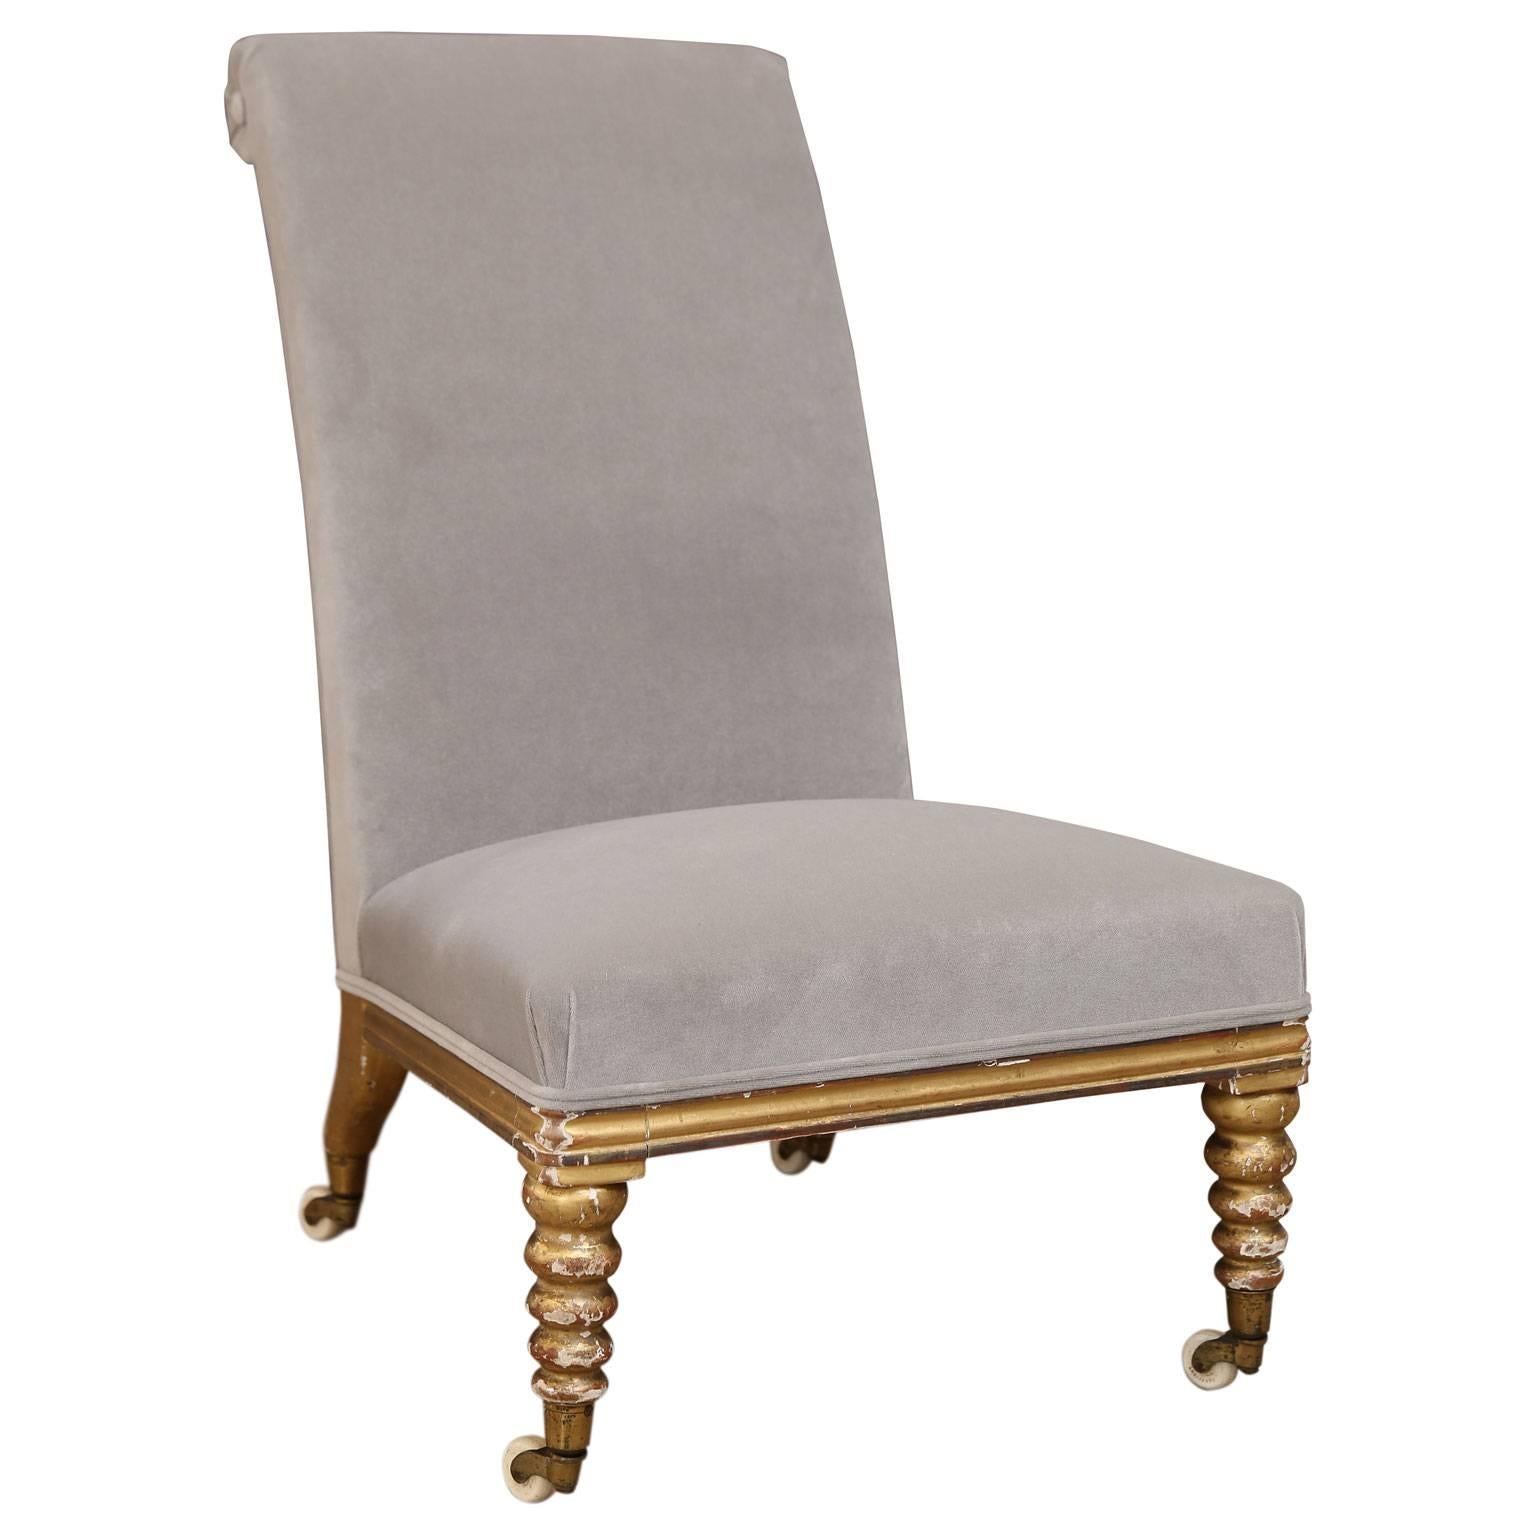 Irish gilt side chair with carved legs on original casters (front legs bobbin), and intact (and reworked) original webbing and horsehair upholstery, newly covered in gray velvet. Dated to the early 19th century with maker's label under seat (seat